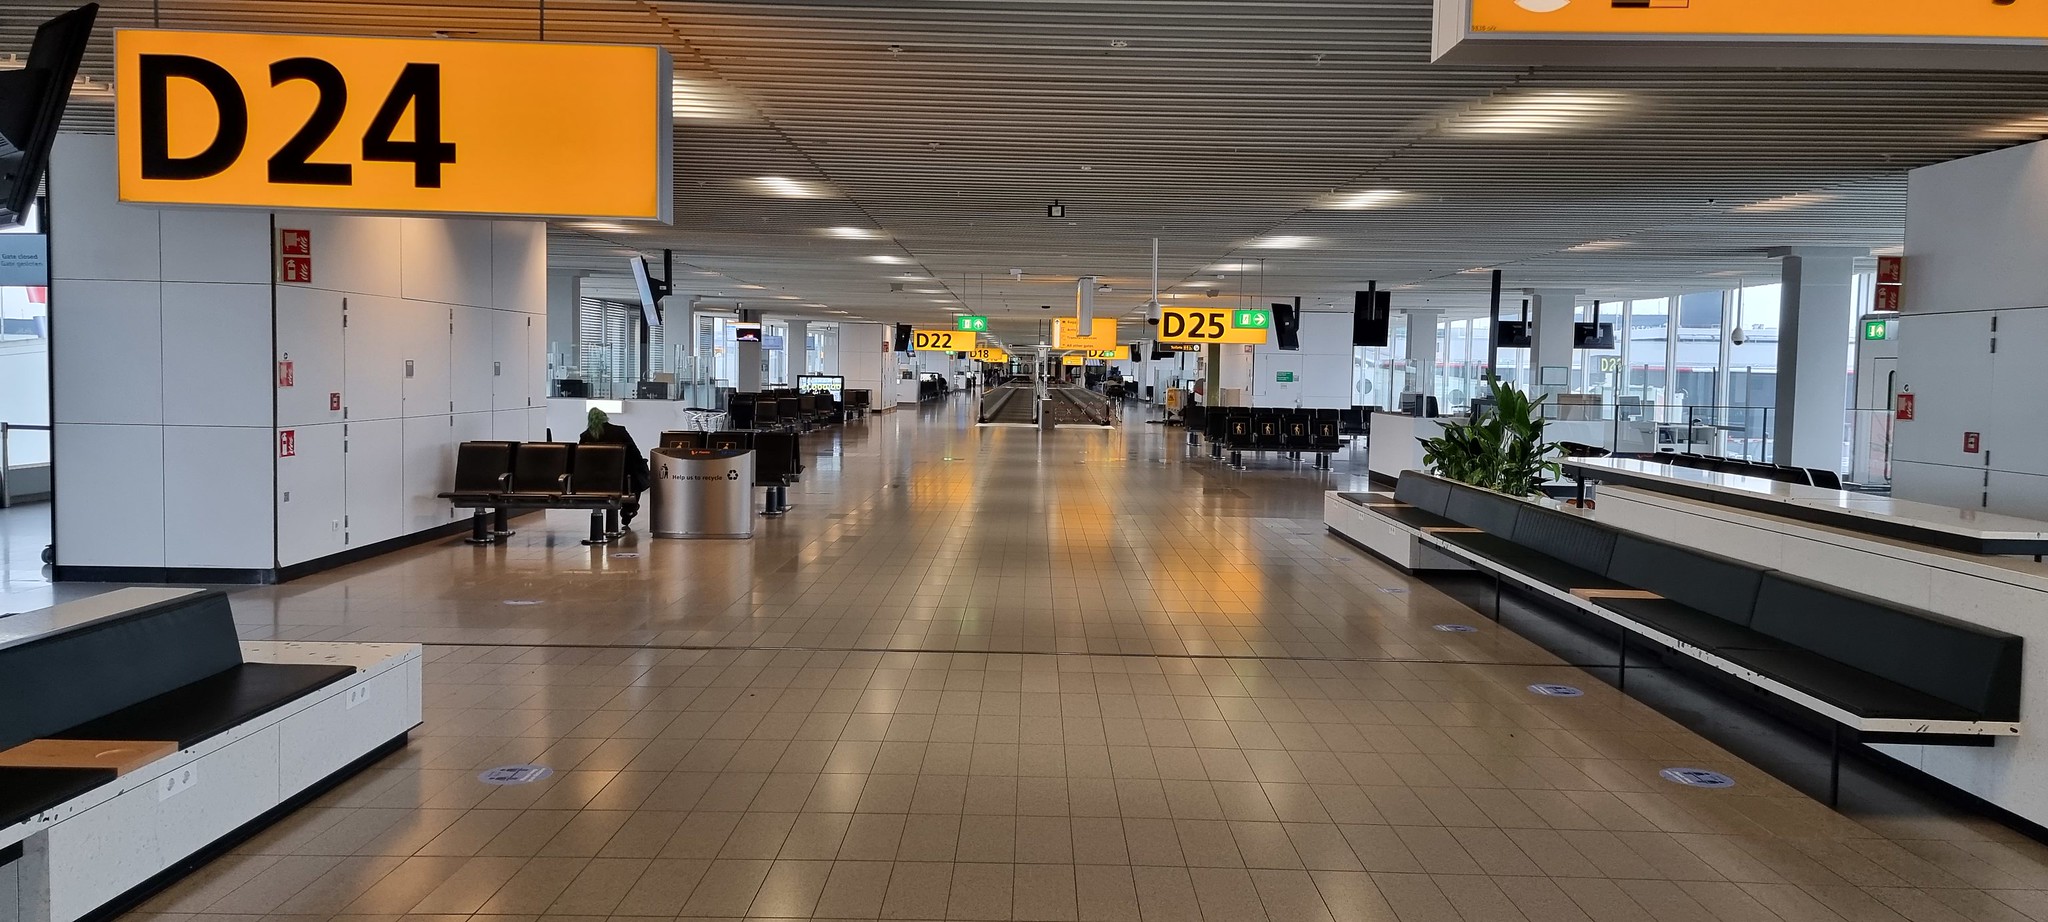 The Amsterdam Airport concourse